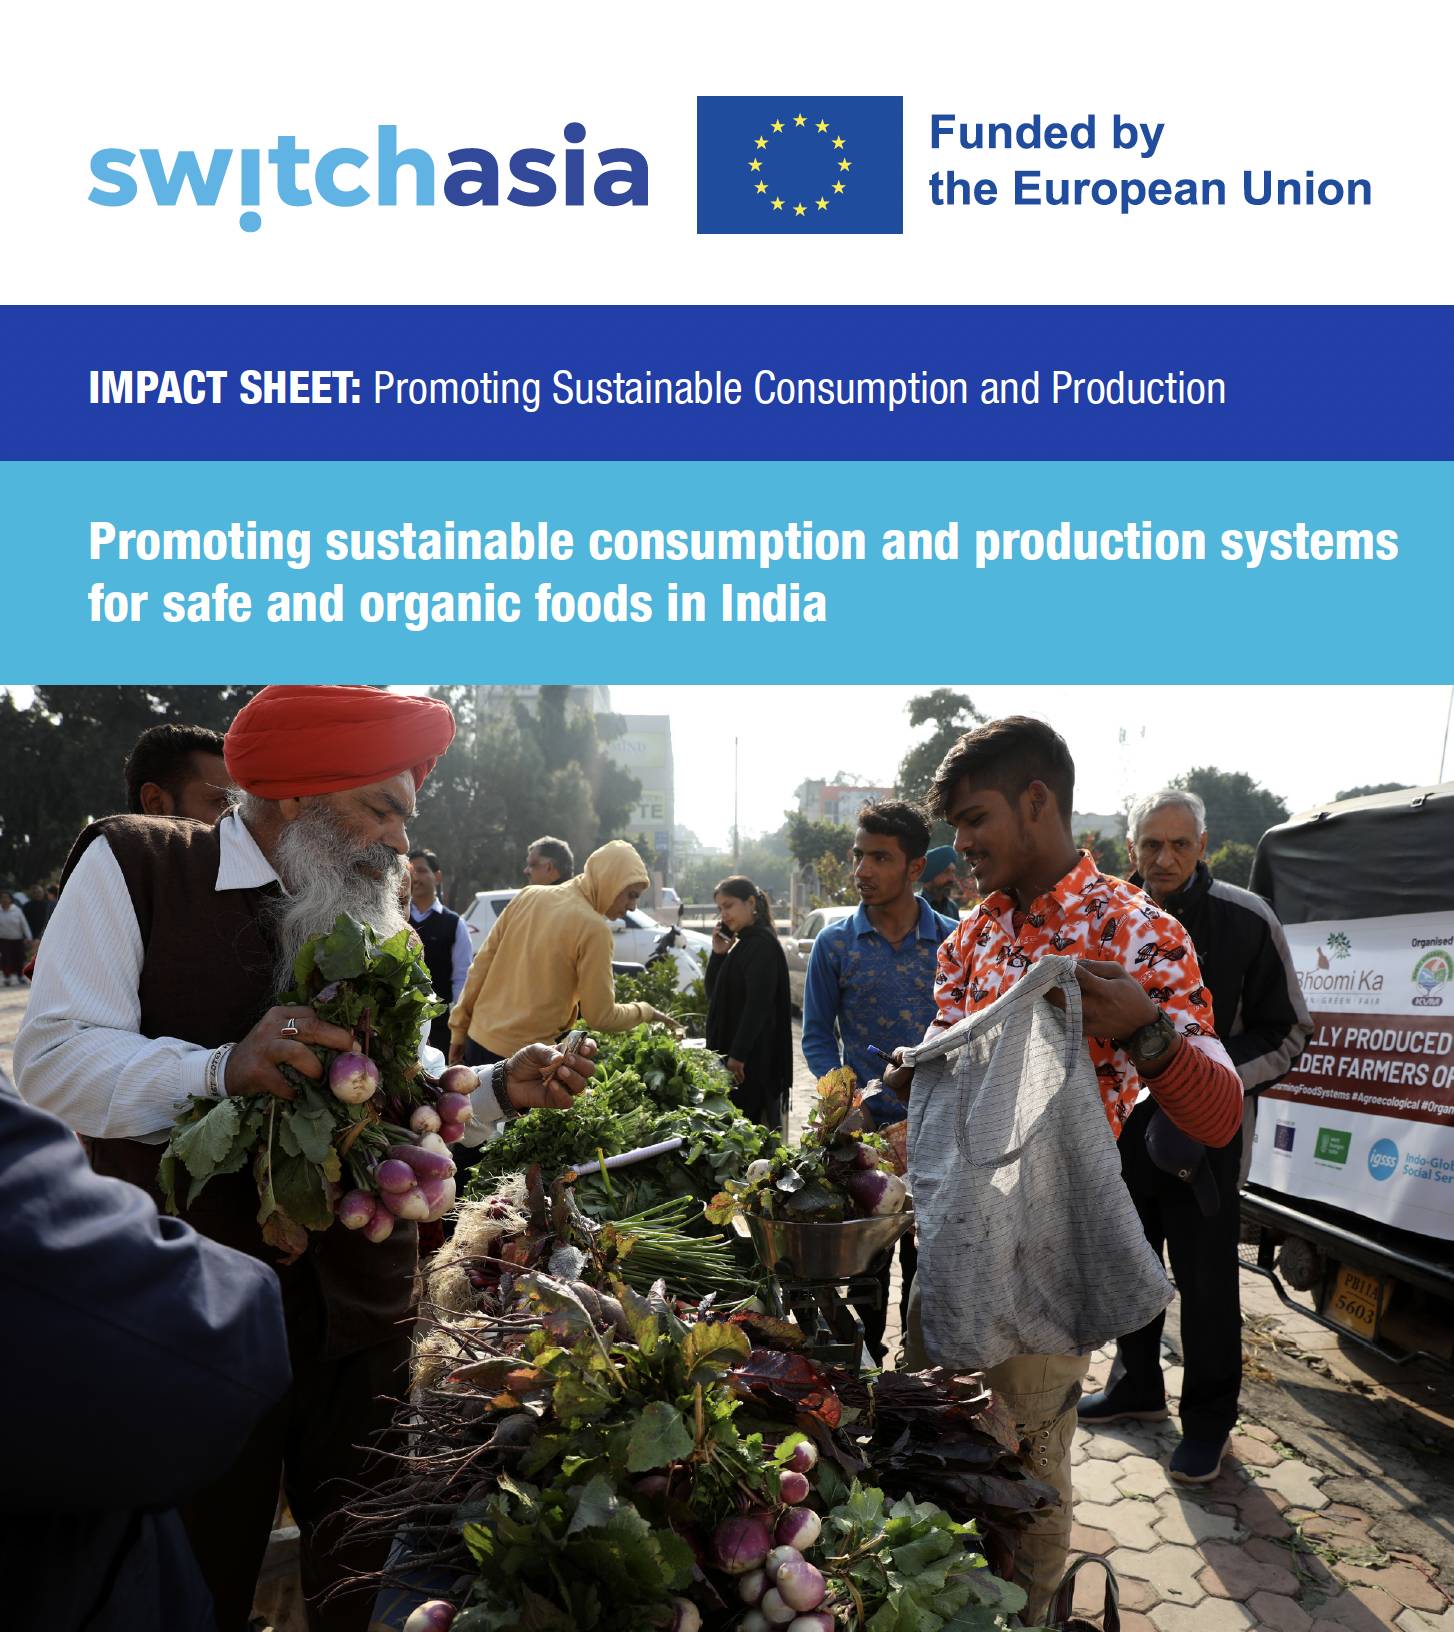 Impact Sheet: Promoting sustainable consumption and production systems for safe and organic foods in India